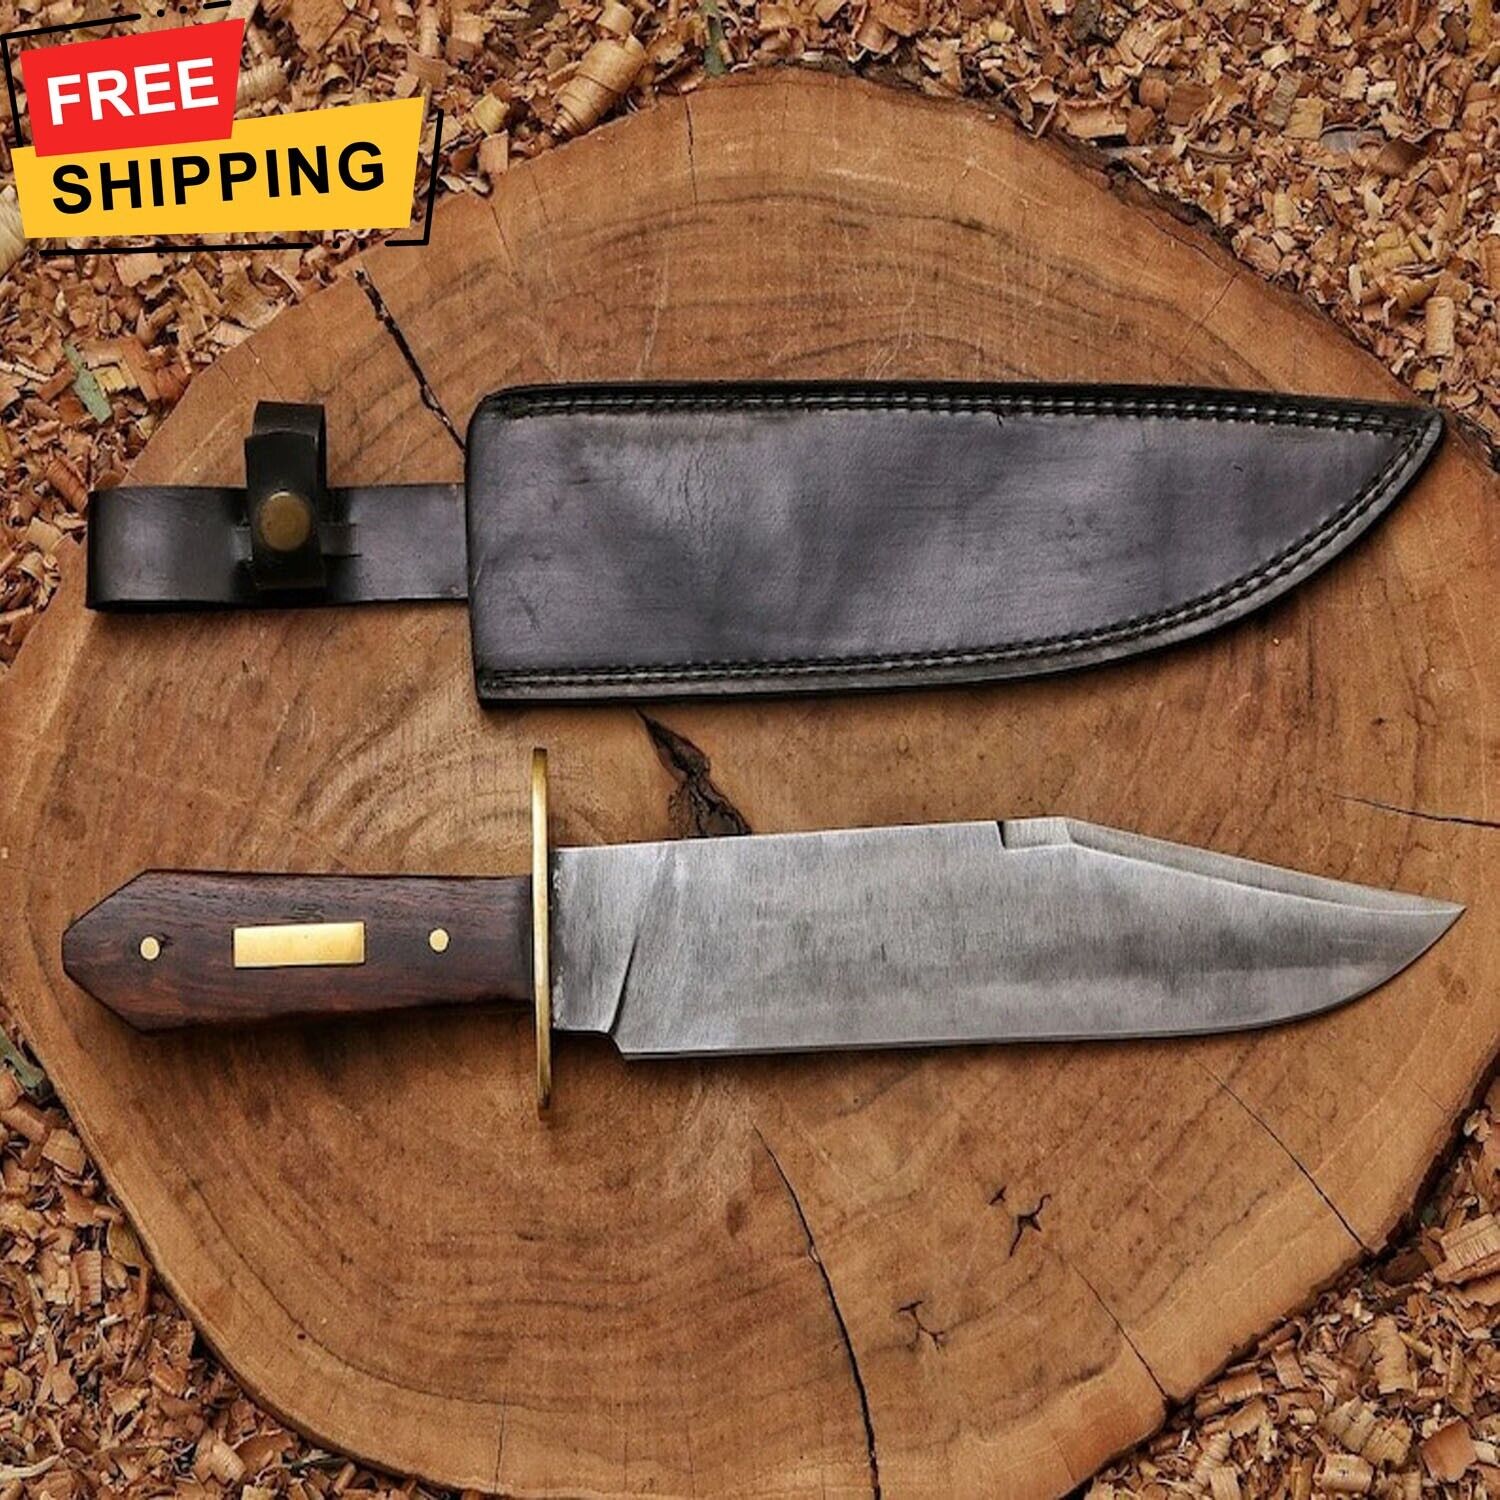 Handmade High Carbon Steel Knife | Gift for him | Hunting | Valentines Day Gift